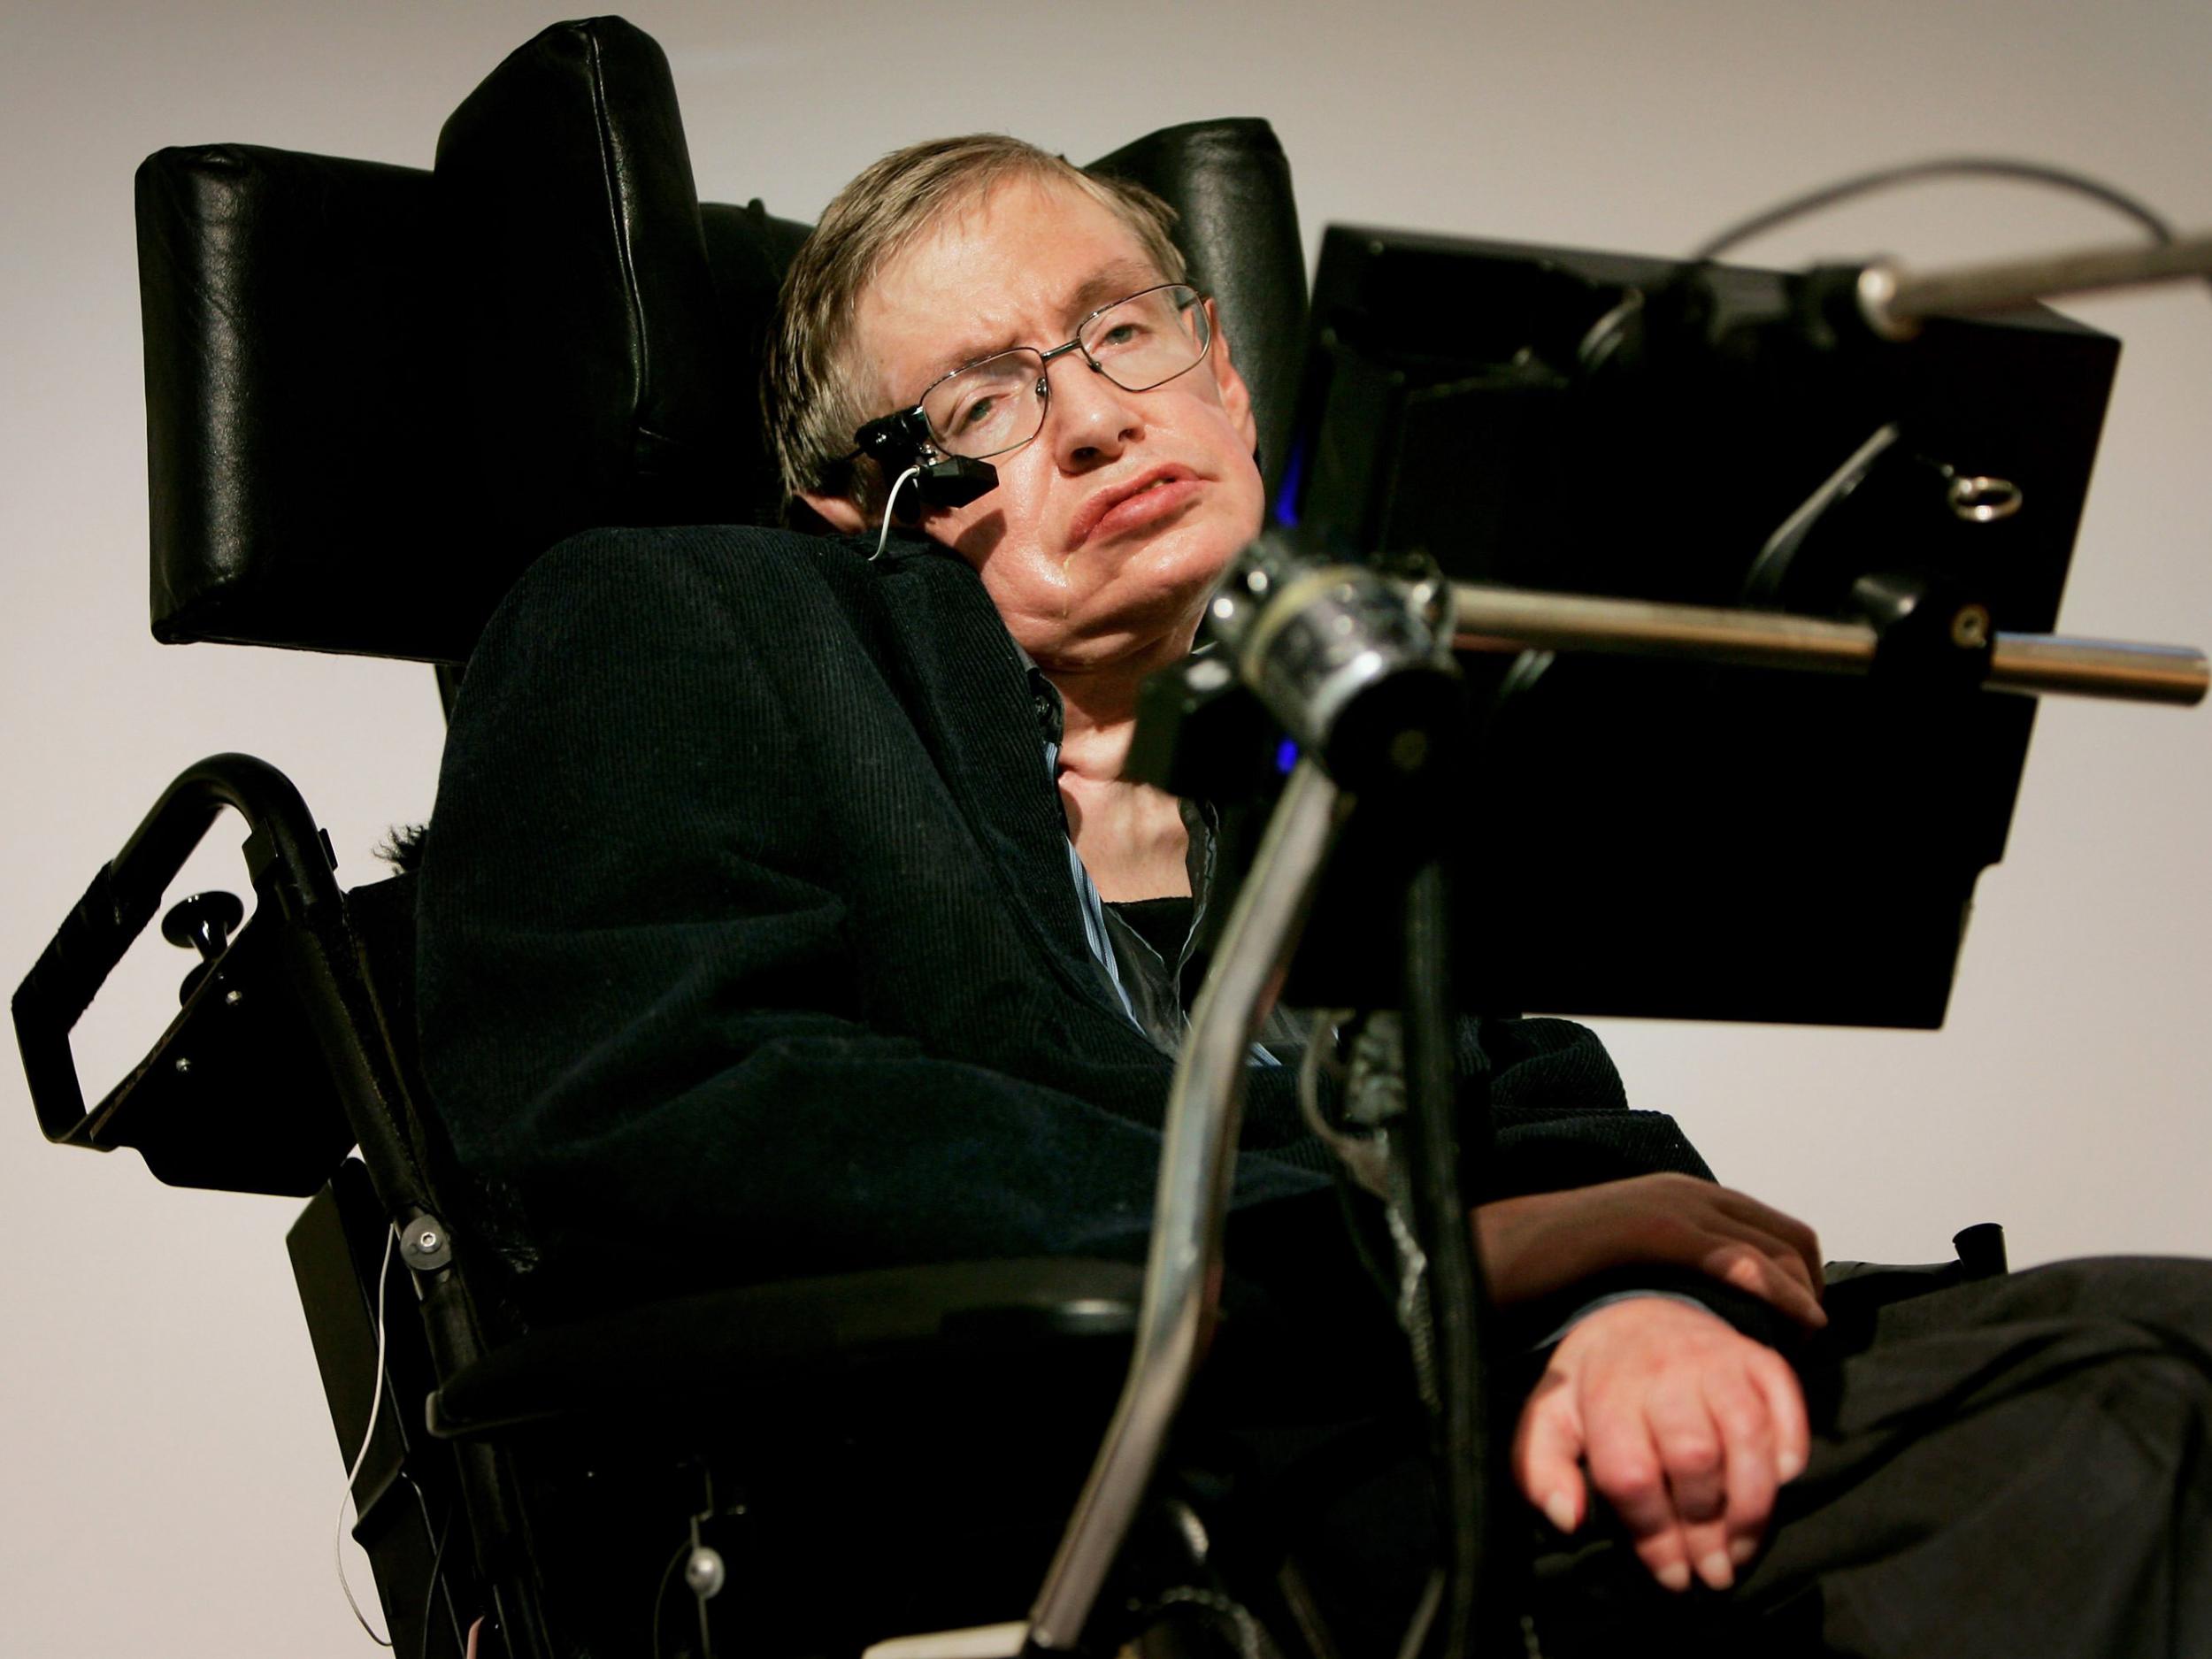 Stephen Hawking S Wheelchair Up For Sale At Online Auction The